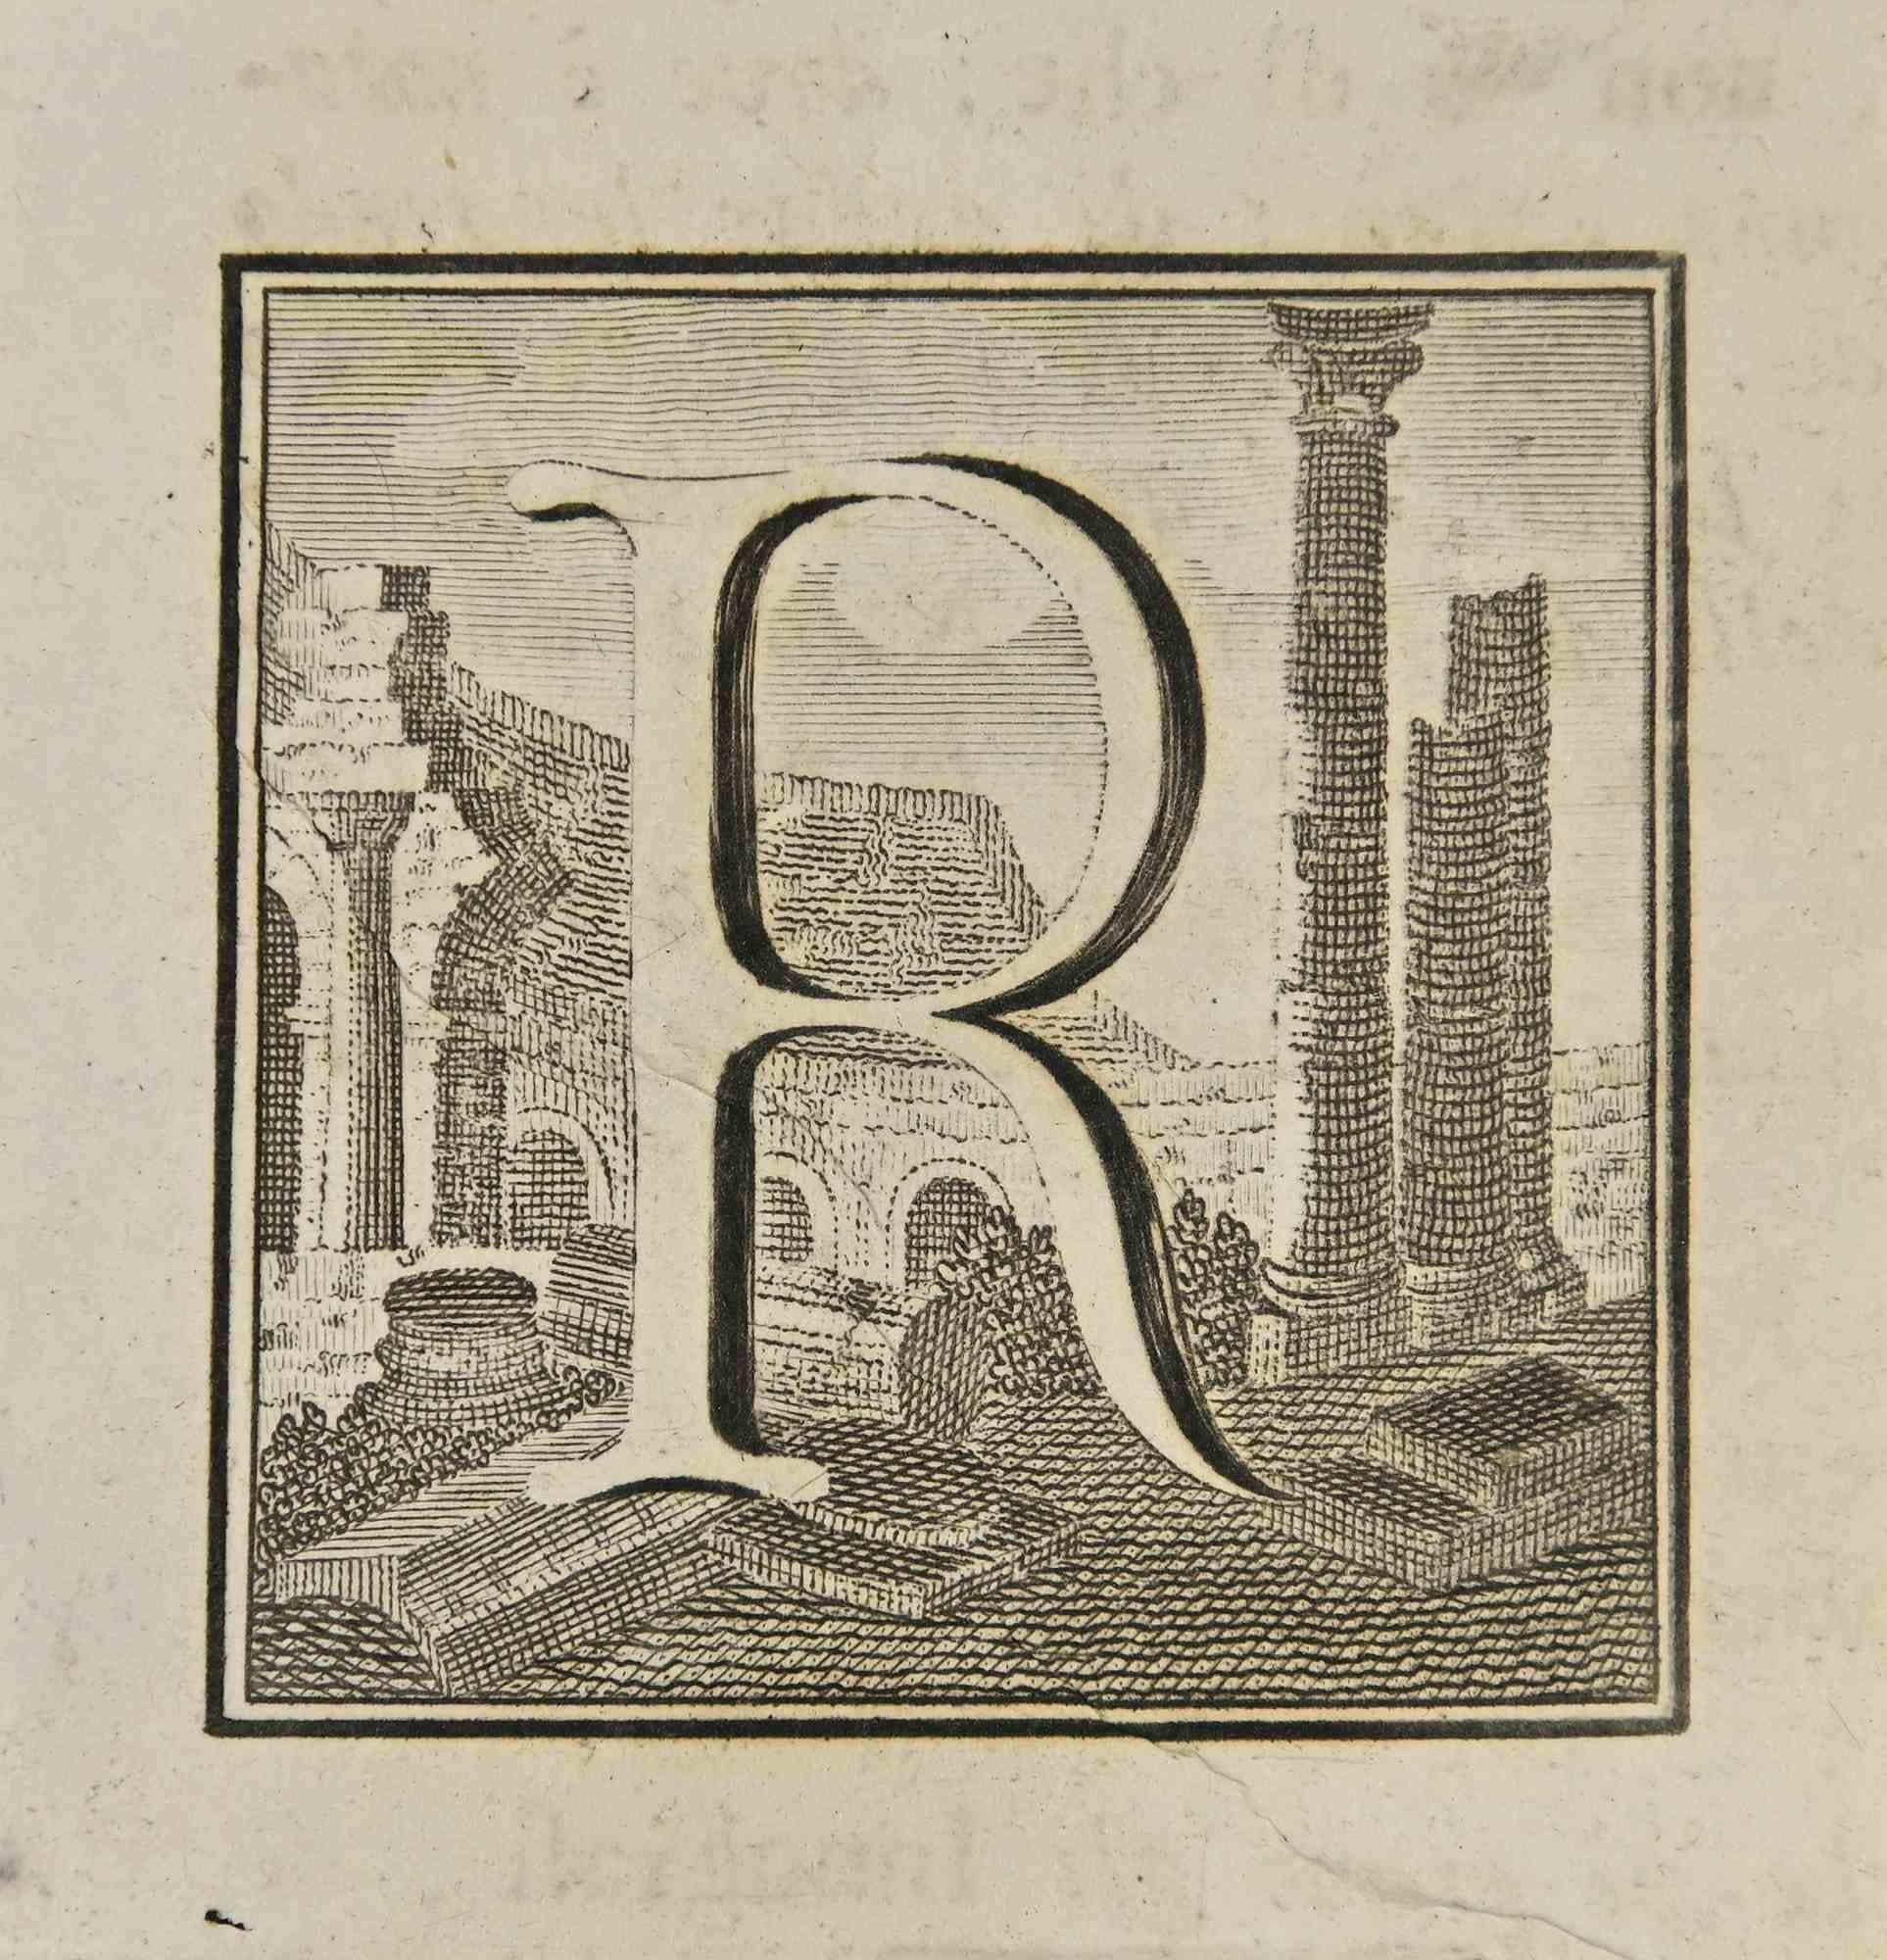 Letter of the Alphabet R,  from the series "Antiquities of Herculaneum", is an etching on paper realized by Luigi Vanvitelli in the 18th century.

Good conditions with minor foxing.

The etching belongs to the print suite “Antiquities of Herculaneum